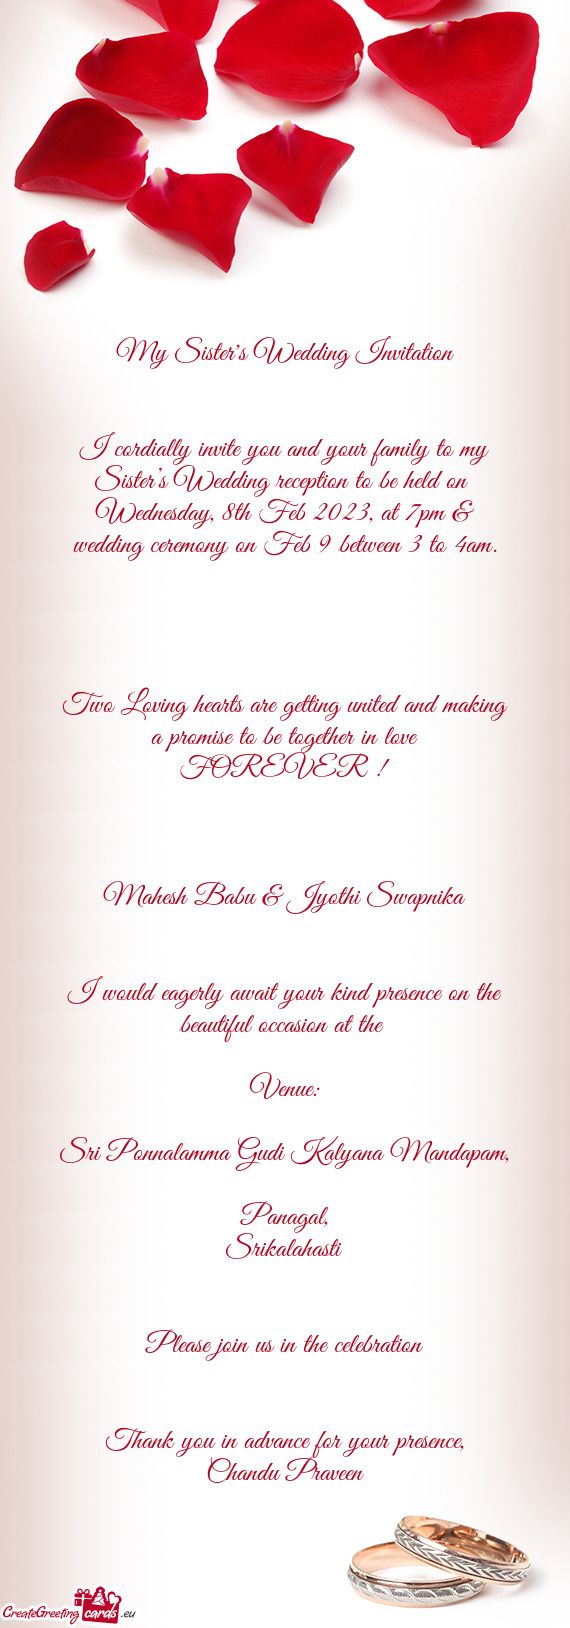 Wednesday, 8th Feb 2023, at 7pm & wedding ceremony on Feb 9 between 3 to 4am